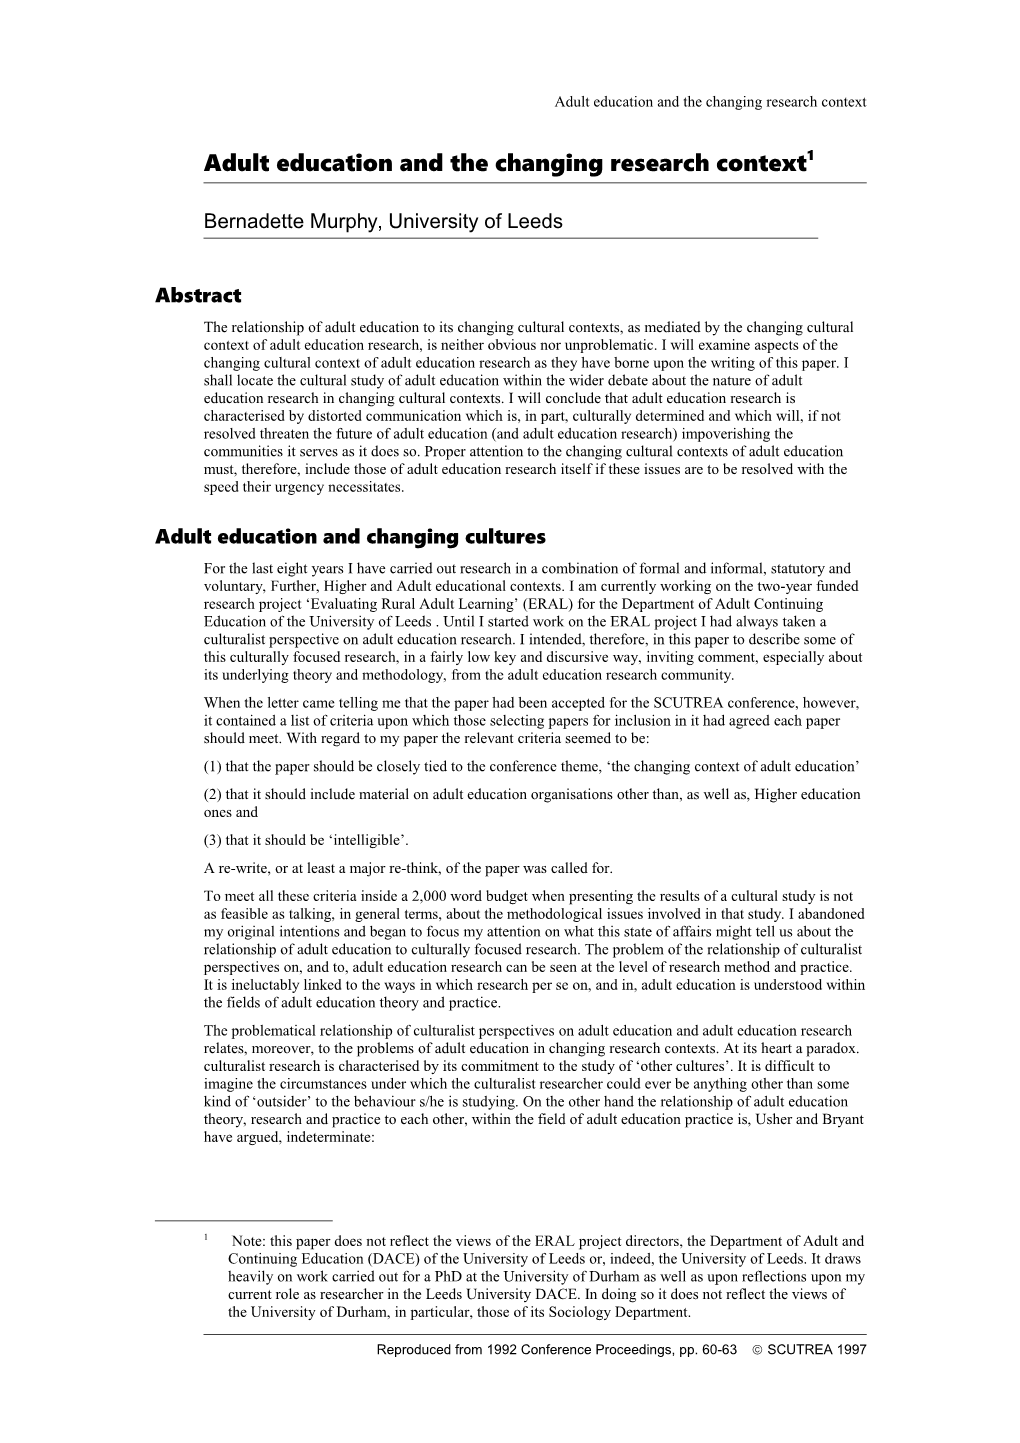 Adult Education and the Changing Research Context 1